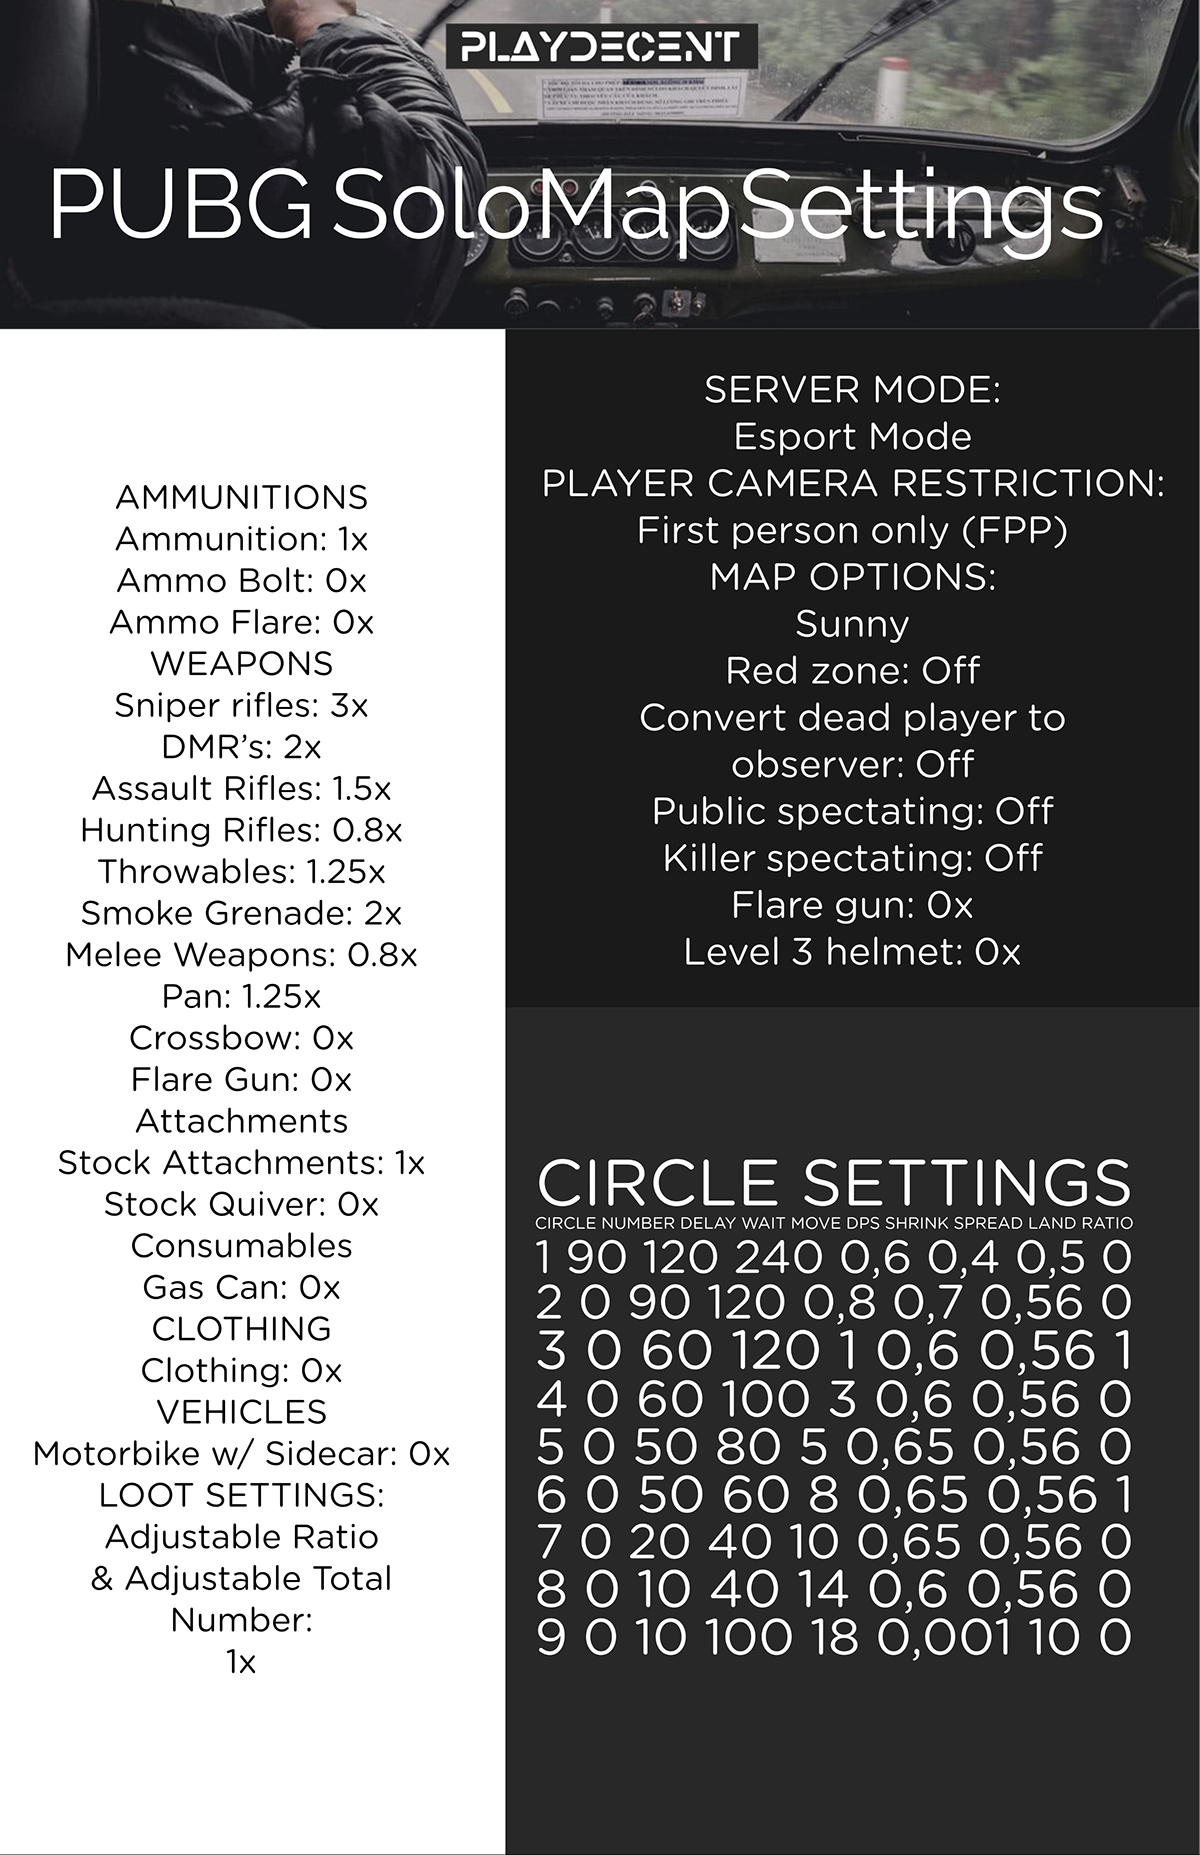 PUBG Solo Map Settings PUBG Solo Map Settings SERVER MODE: Esport Mode

PLAYER CAMERA RESTRICTION: 
First person only (FPP)
MAP OPTIONS: 
Sunny
Red zone: Off
Convert dead player to observer: Off
Public spectating: Off
Killer spectating: Off
Flare gun: 0x
Level 3 helmet: 0x AMMUNITIONS Ammunition: 1x
Ammo Bolt: 0x
Ammo Flare: 0x

WEAPONS
Sniper rifles: 3x
DMR’s: 2x
Assault Rifles: 1.5x
Hunting Rifles: 0.8x
Throwables: 1.25x
Smoke Grenade: 2x
Melee Weapons: 0.8x
Pan: 1.25x
Crossbow: 0x
Flare Gun: 0x
Attachments

Stock Attachments: 1x
Stock Quiver: 0x
Consumables

Gas Can: 0x

CLOTHING
Clothing: 0x

VEHICLES
Motorbike w/ Sidecar: 0x


LOOT SETTINGS:
Adjustable Ratio 
& Adjustable Total
Number: 
1x Circle Settings 
Circle Number Delay Wait Move DPS Shrink Spread Land Ratio
1 90 120 240 0,6 0,4 0,5 0
2 0 90 120 0,8 0,7 0,56 0
3 0 60 120 1 0,6 0,56 1
4 0 60 100 3 0,6 0,56 0
5 0 50 80 5 0,65 0,56 0
6 0 50 60 8 0,65 0,56 1
7 0 20 40 10 0,65 0,56 0
8 0 10 40 14 0,6 0,56 0
9 0 10 100 18 0,001 10 0